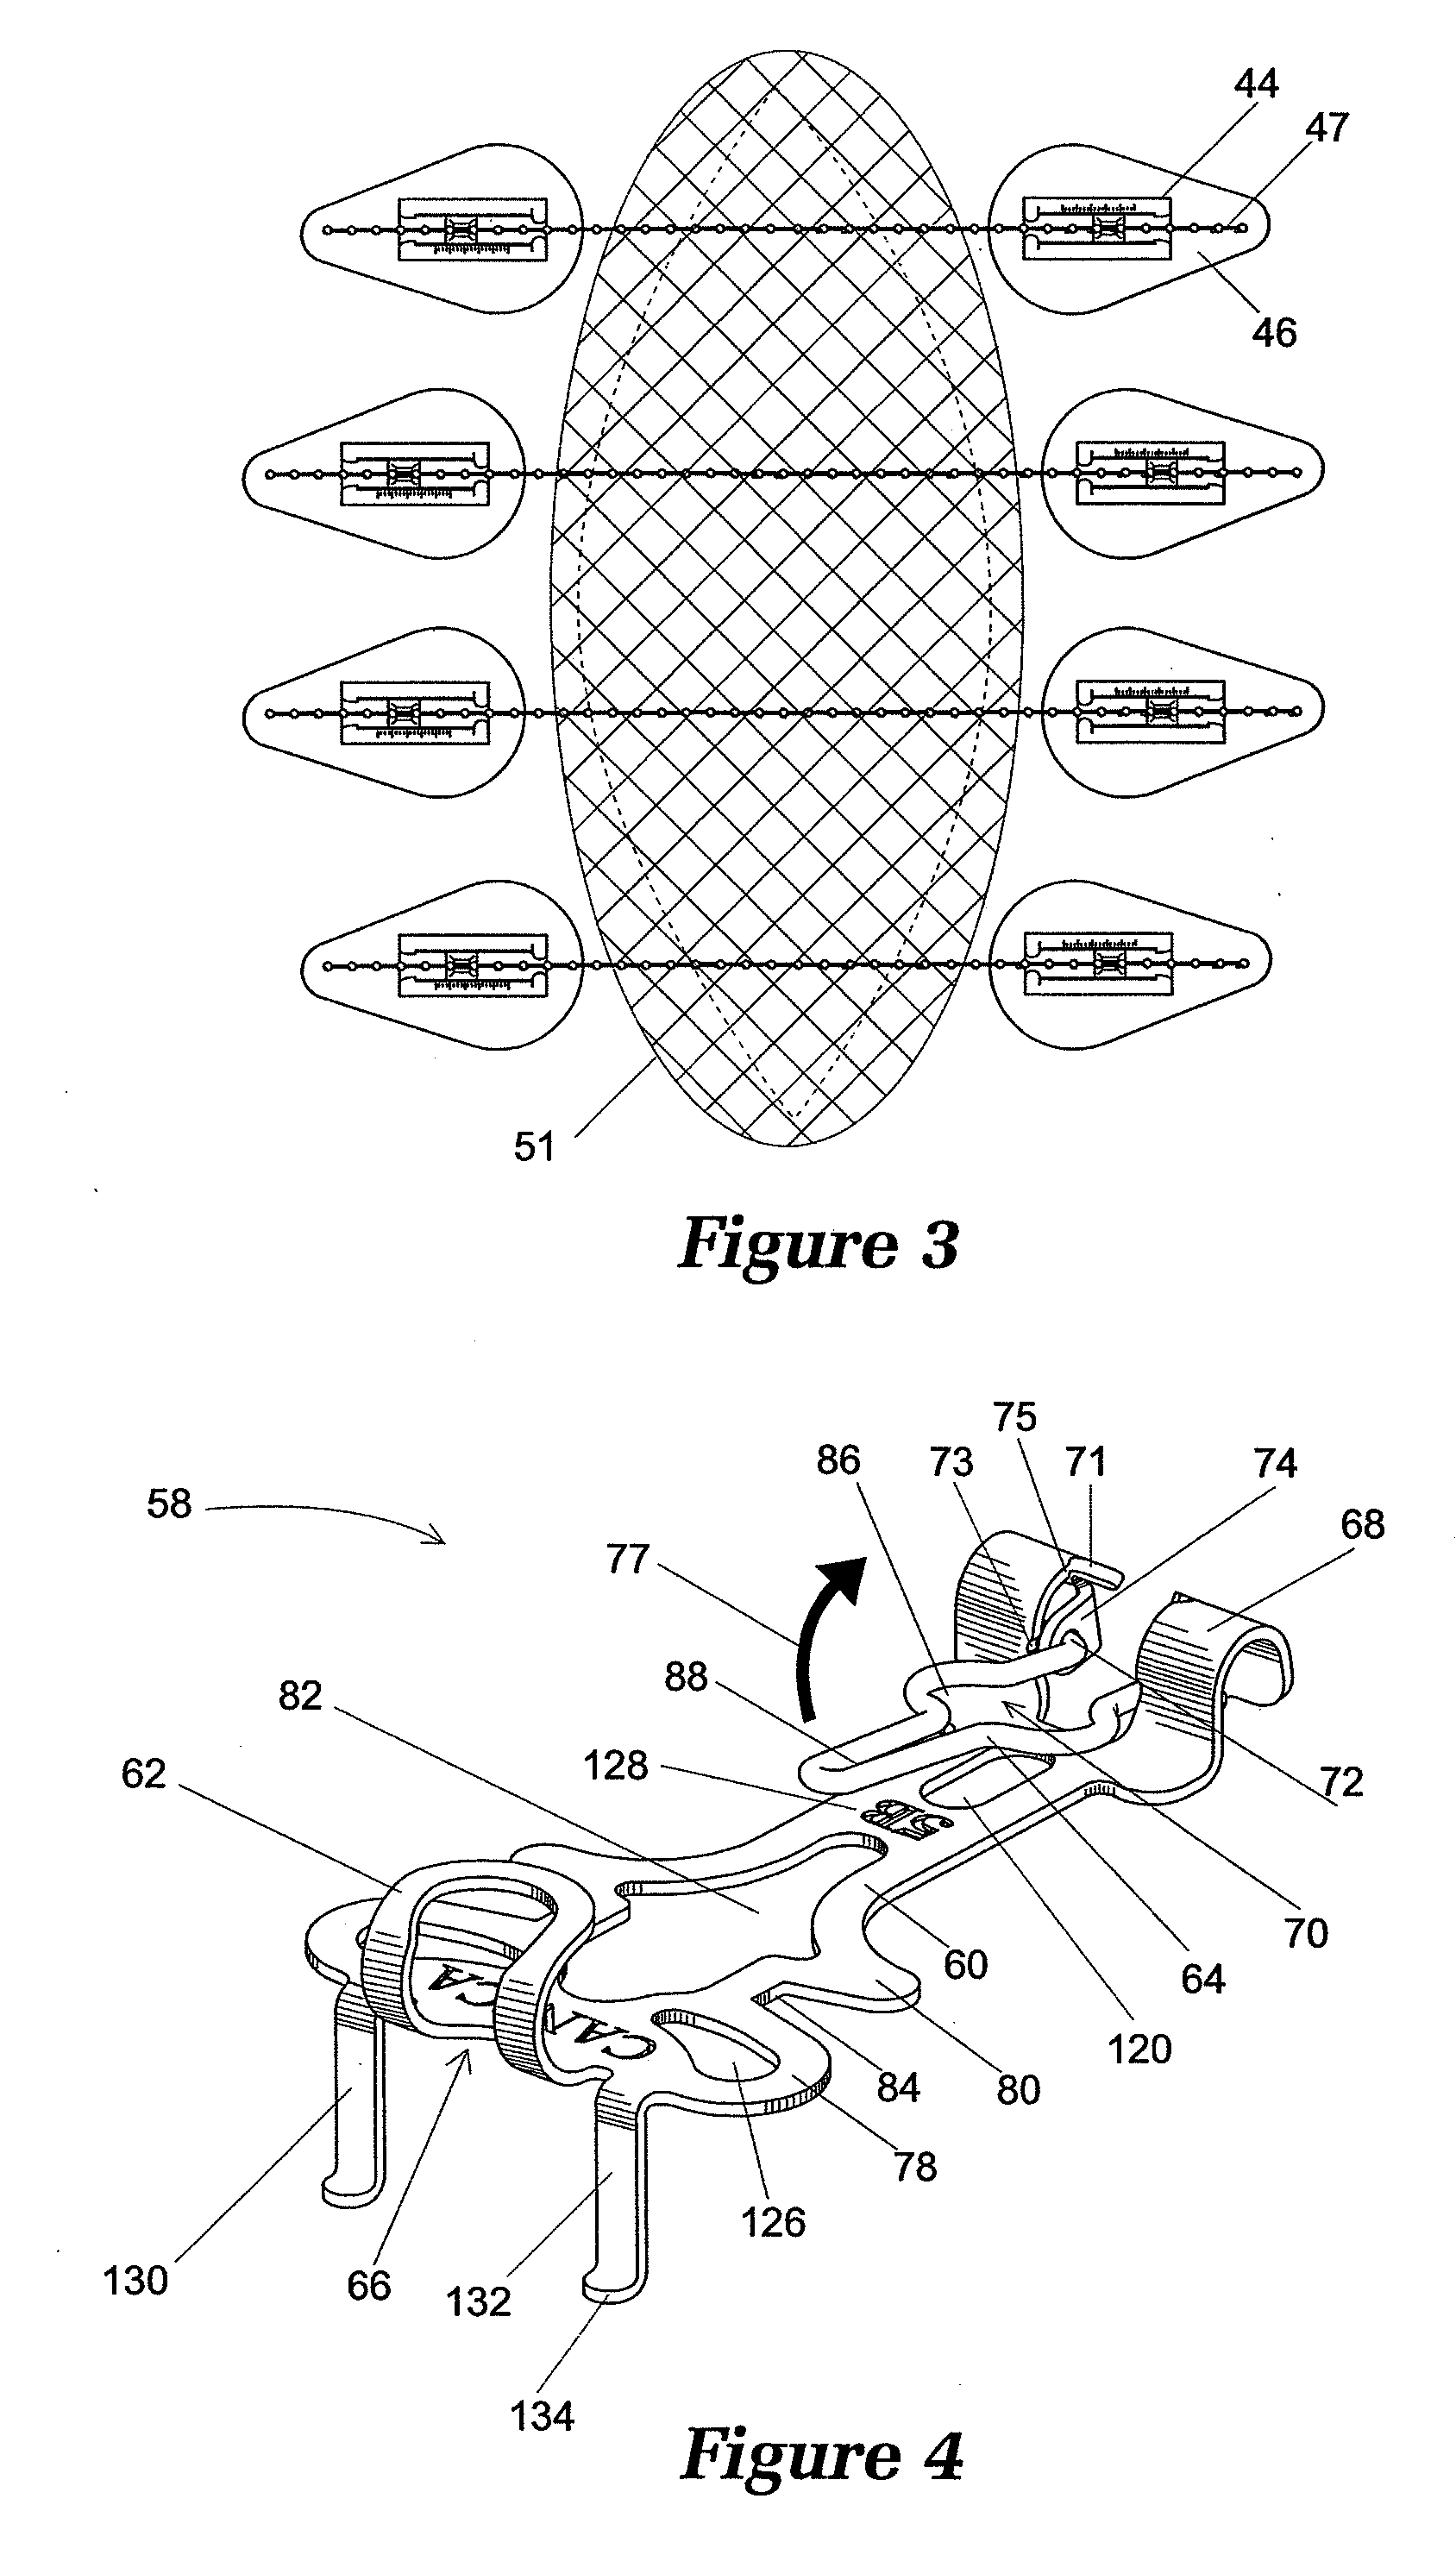 Clinical and Surgical System and Method for Moving and Stretching Plastic Tissue